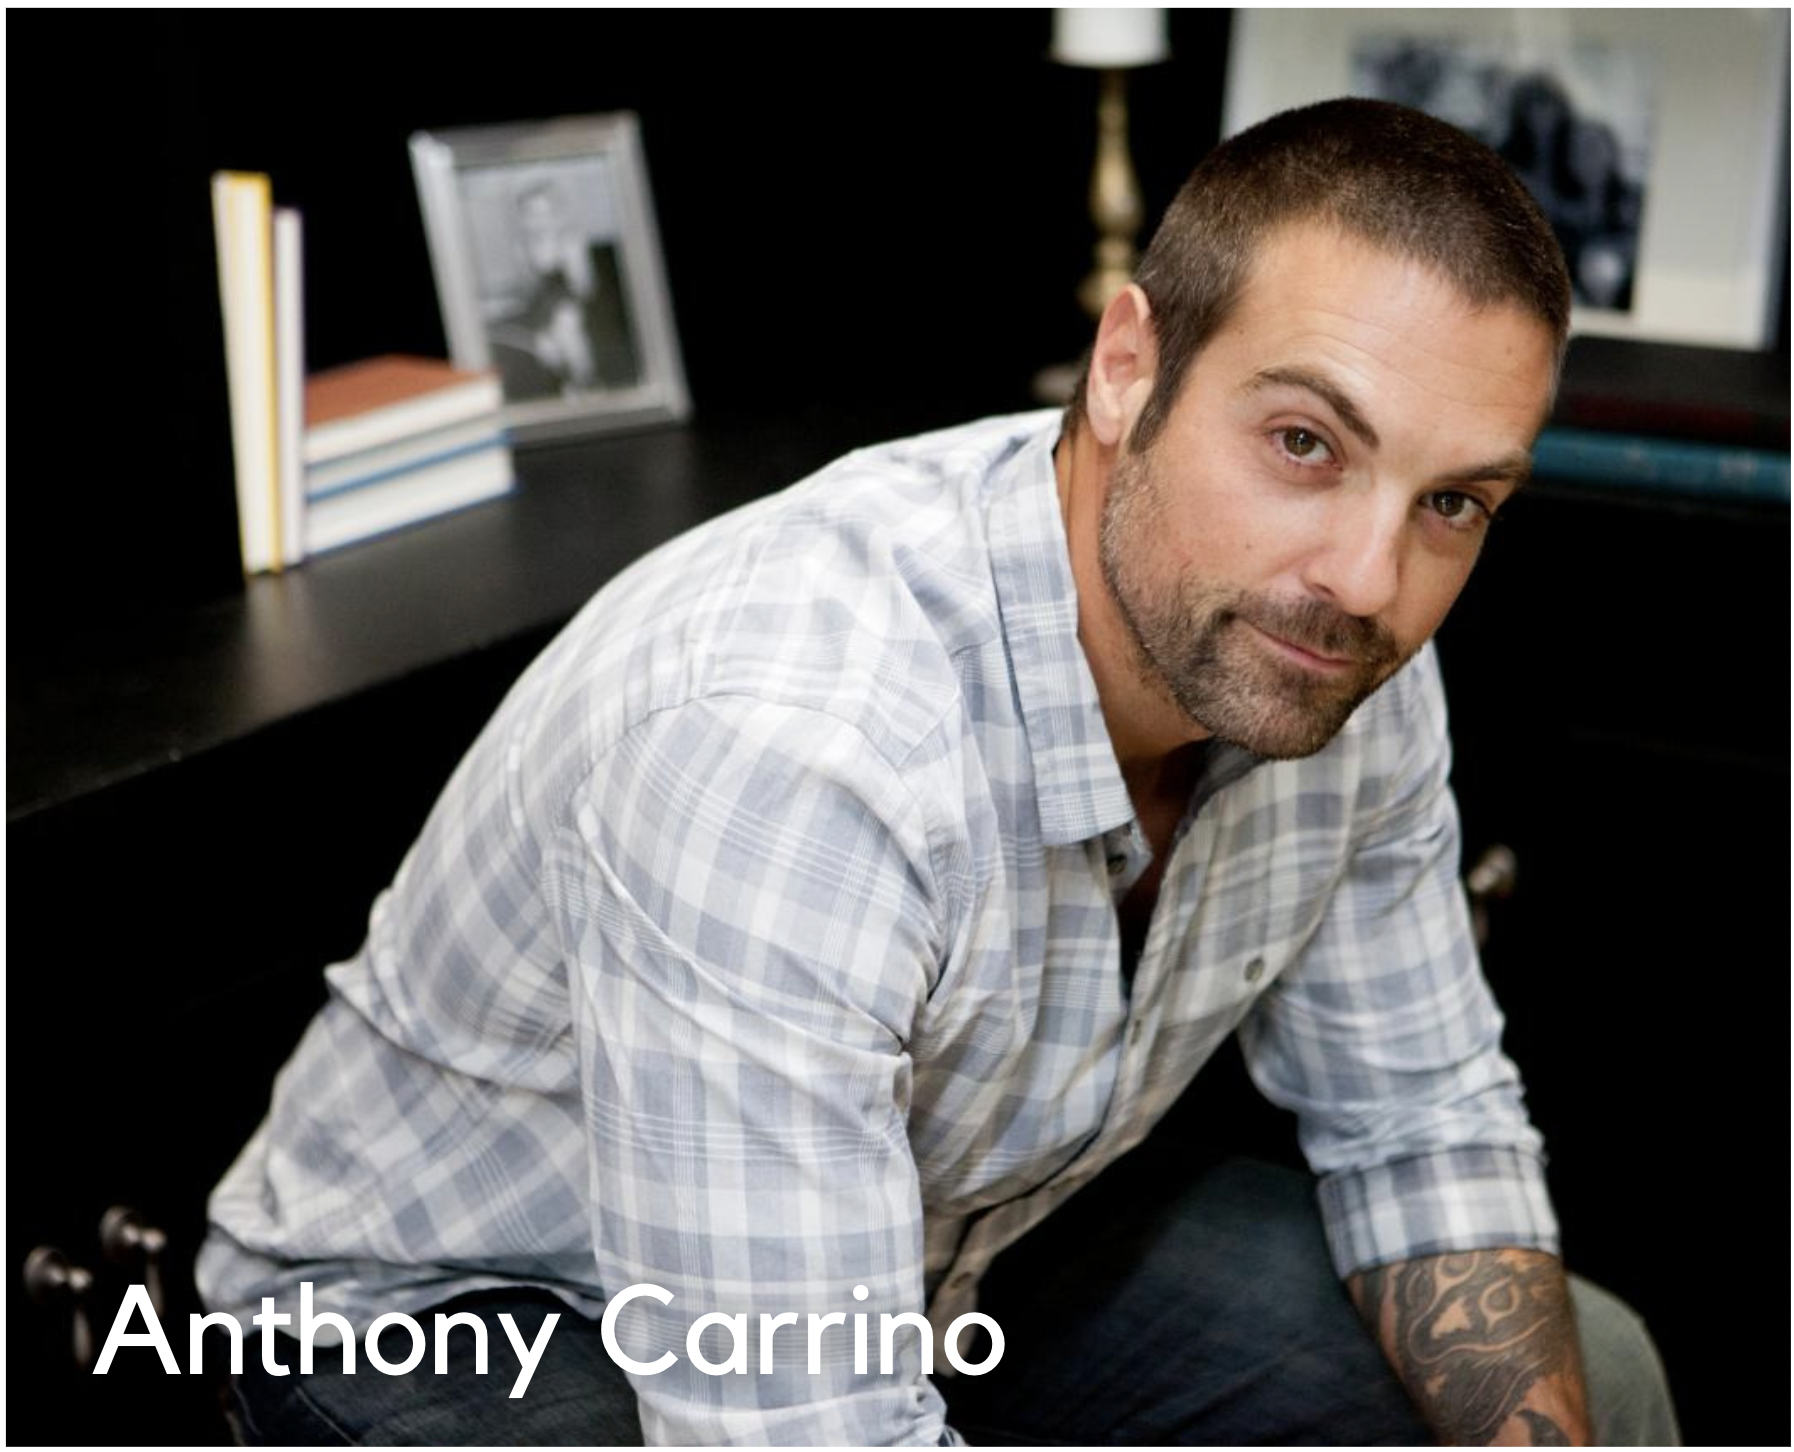 Anthony Carrino is VP of design for Welcome Homes 